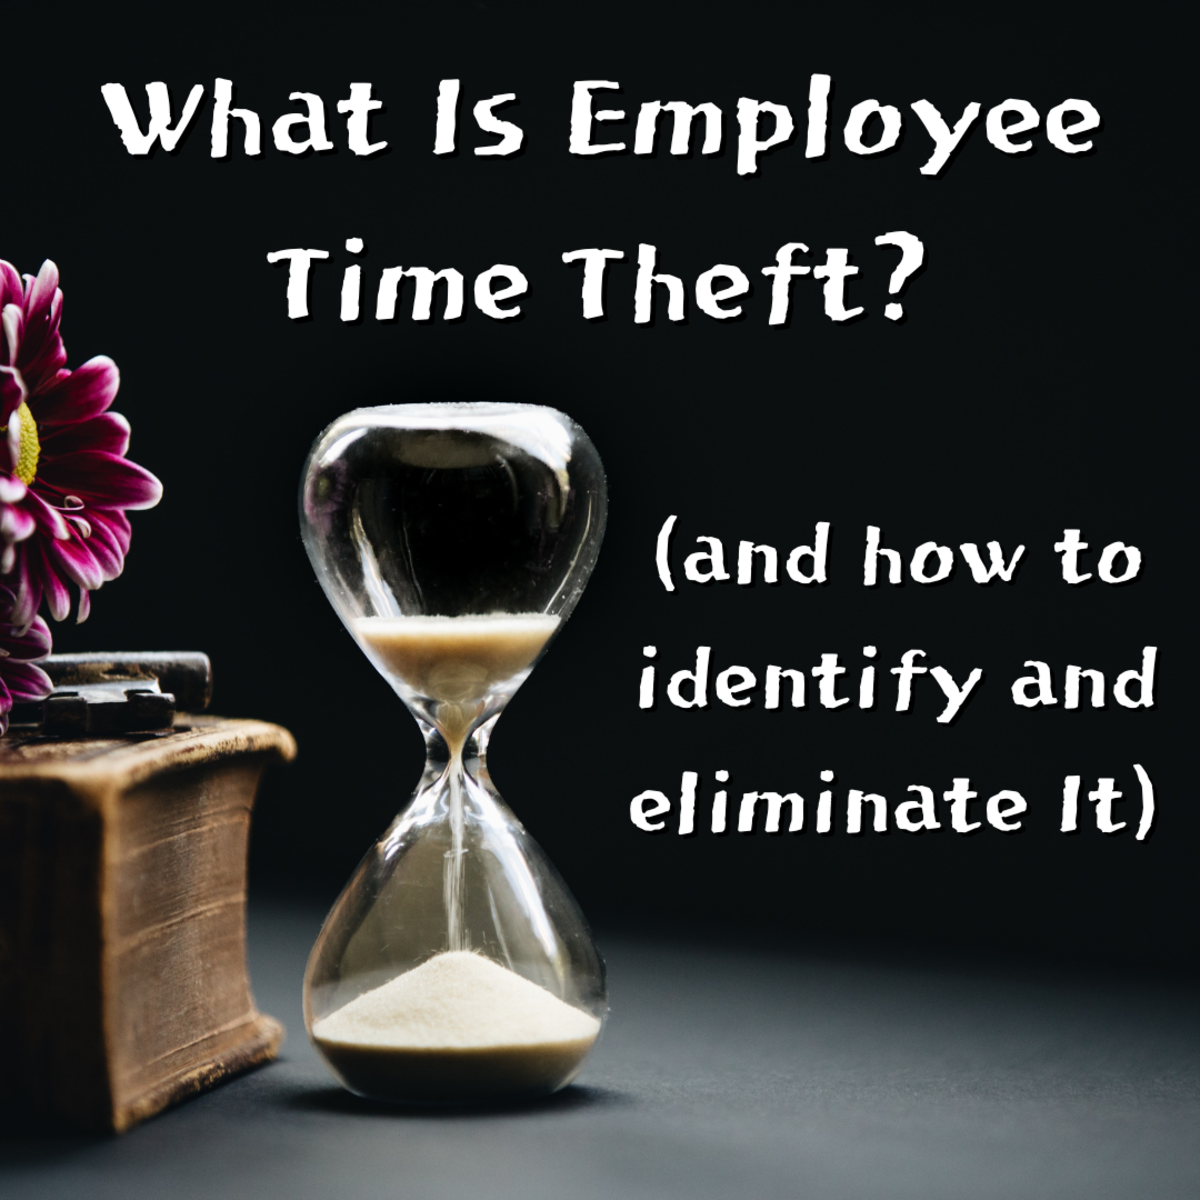 What Is Employee Time Theft? (How to Identify and Eliminate It)